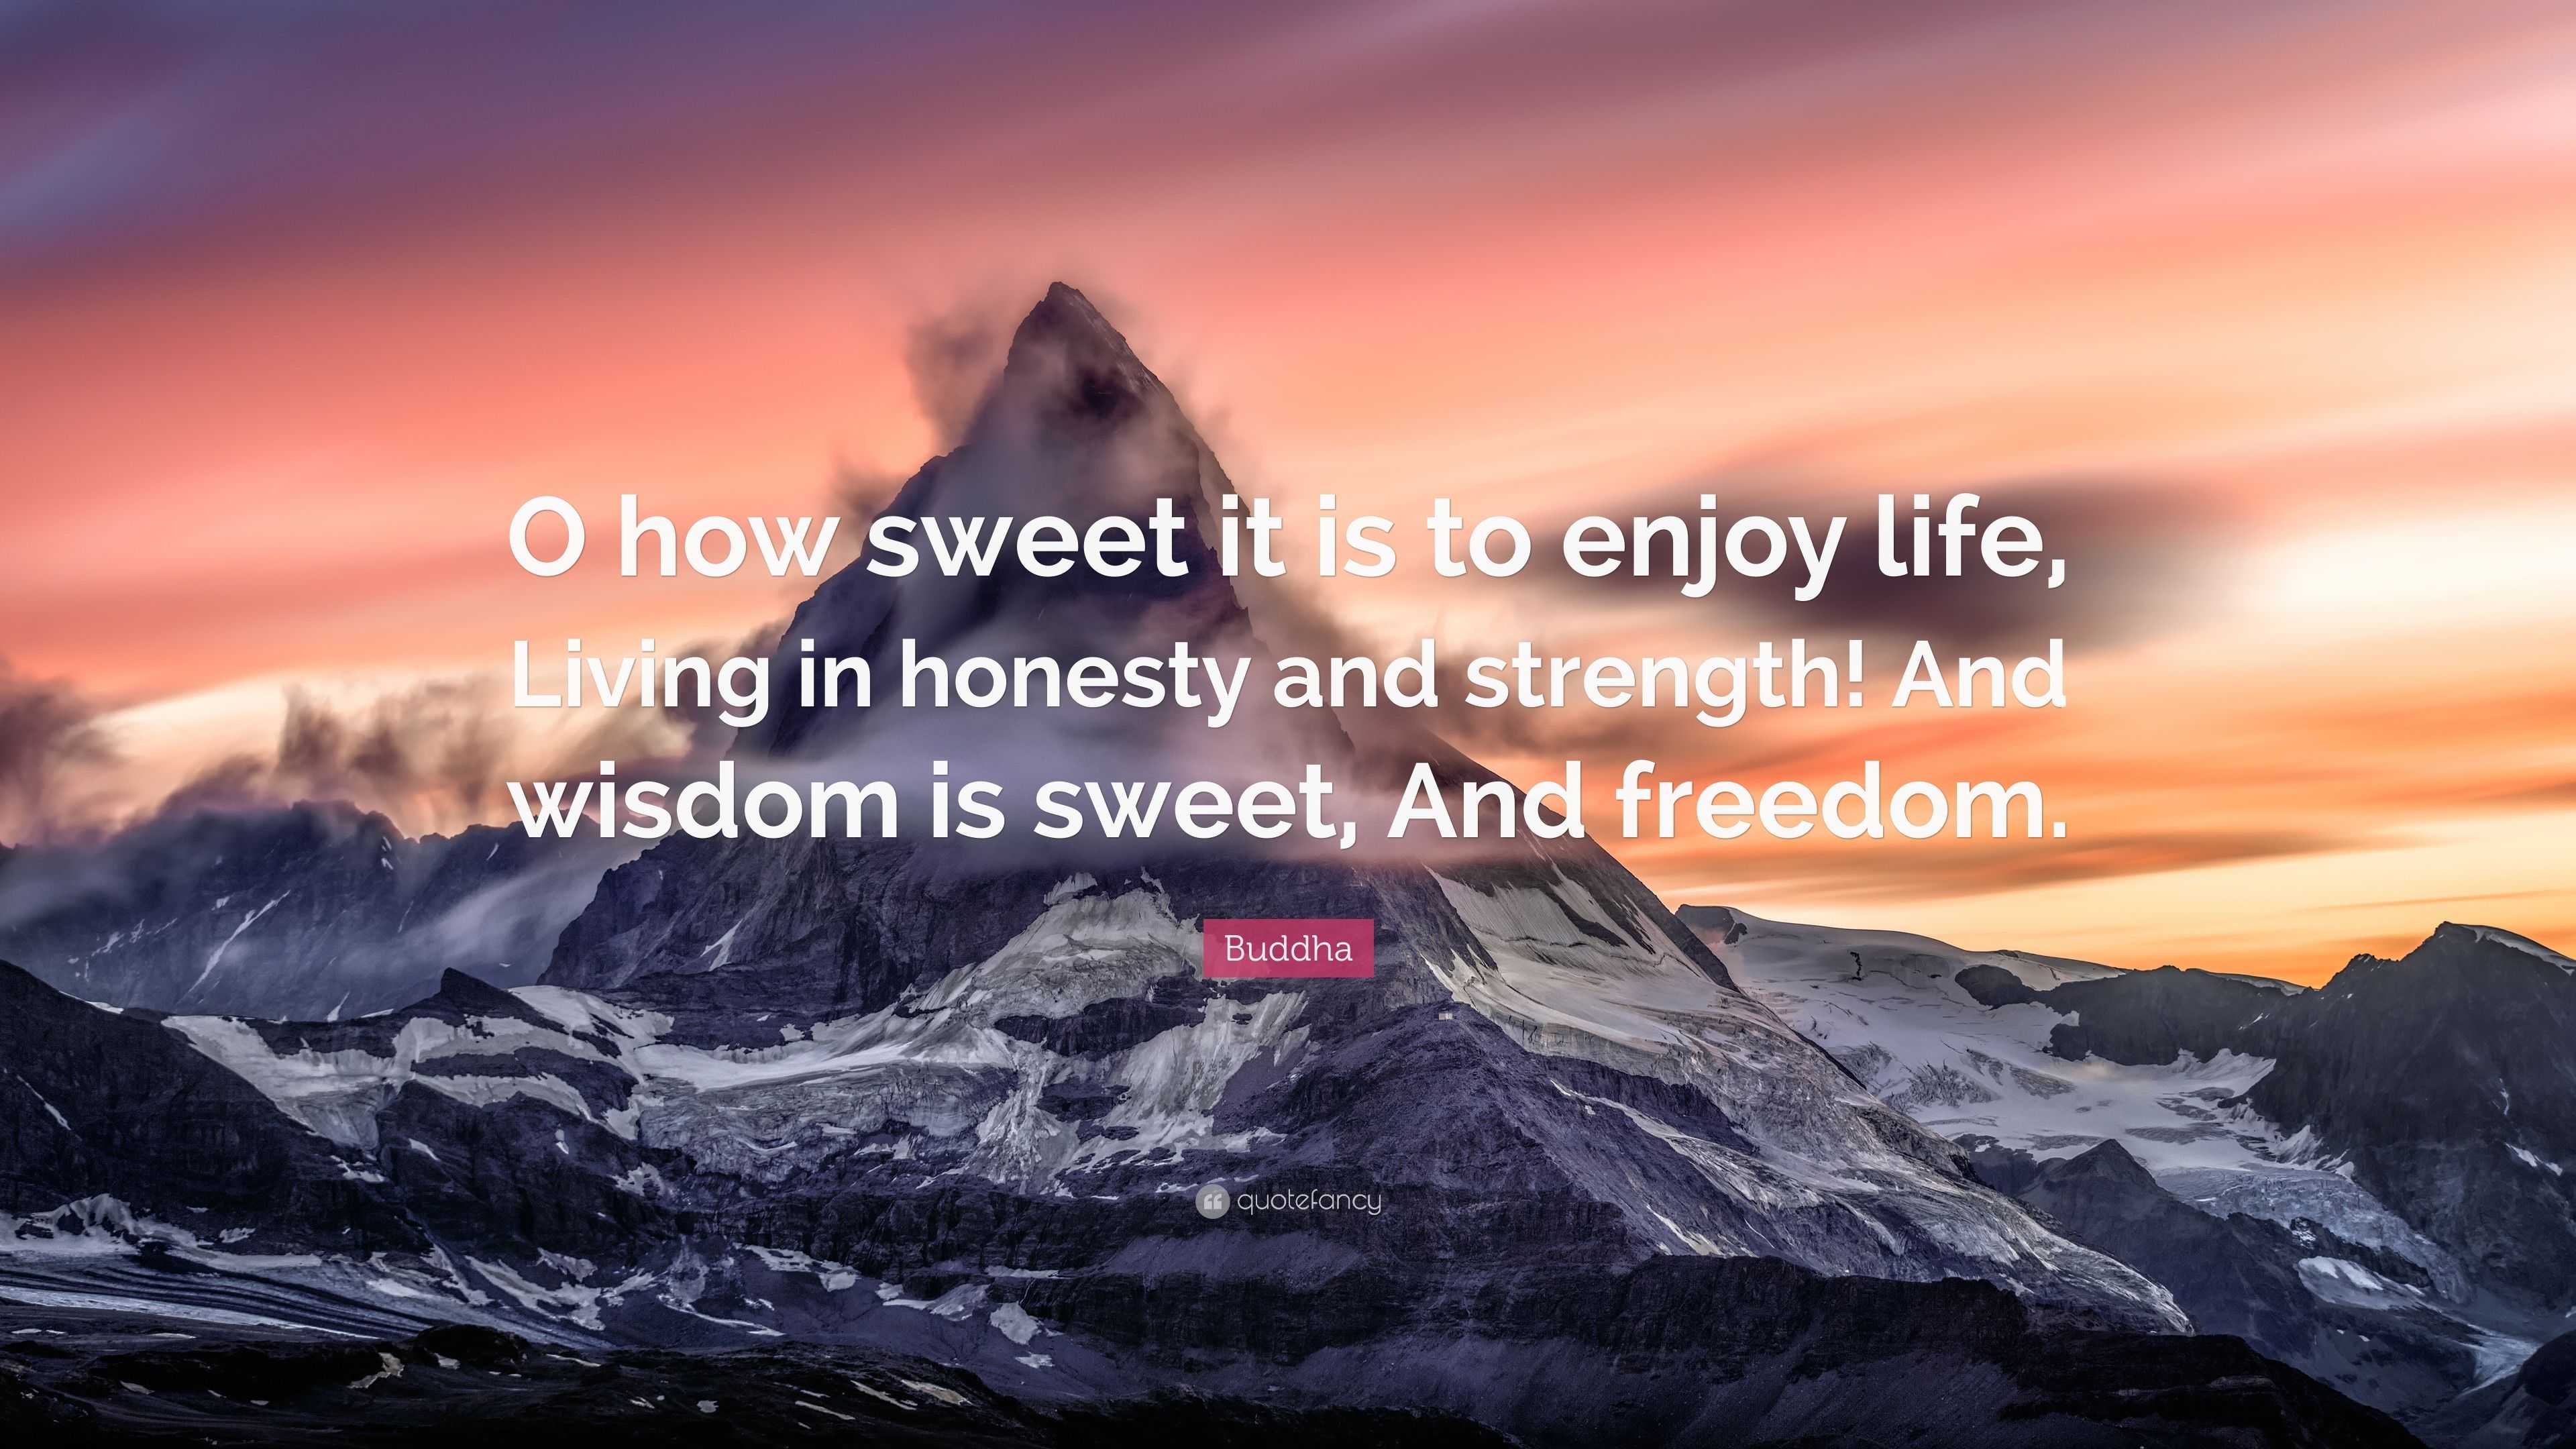 Buddha Quote “O how sweet it is to enjoy life Living in honesty